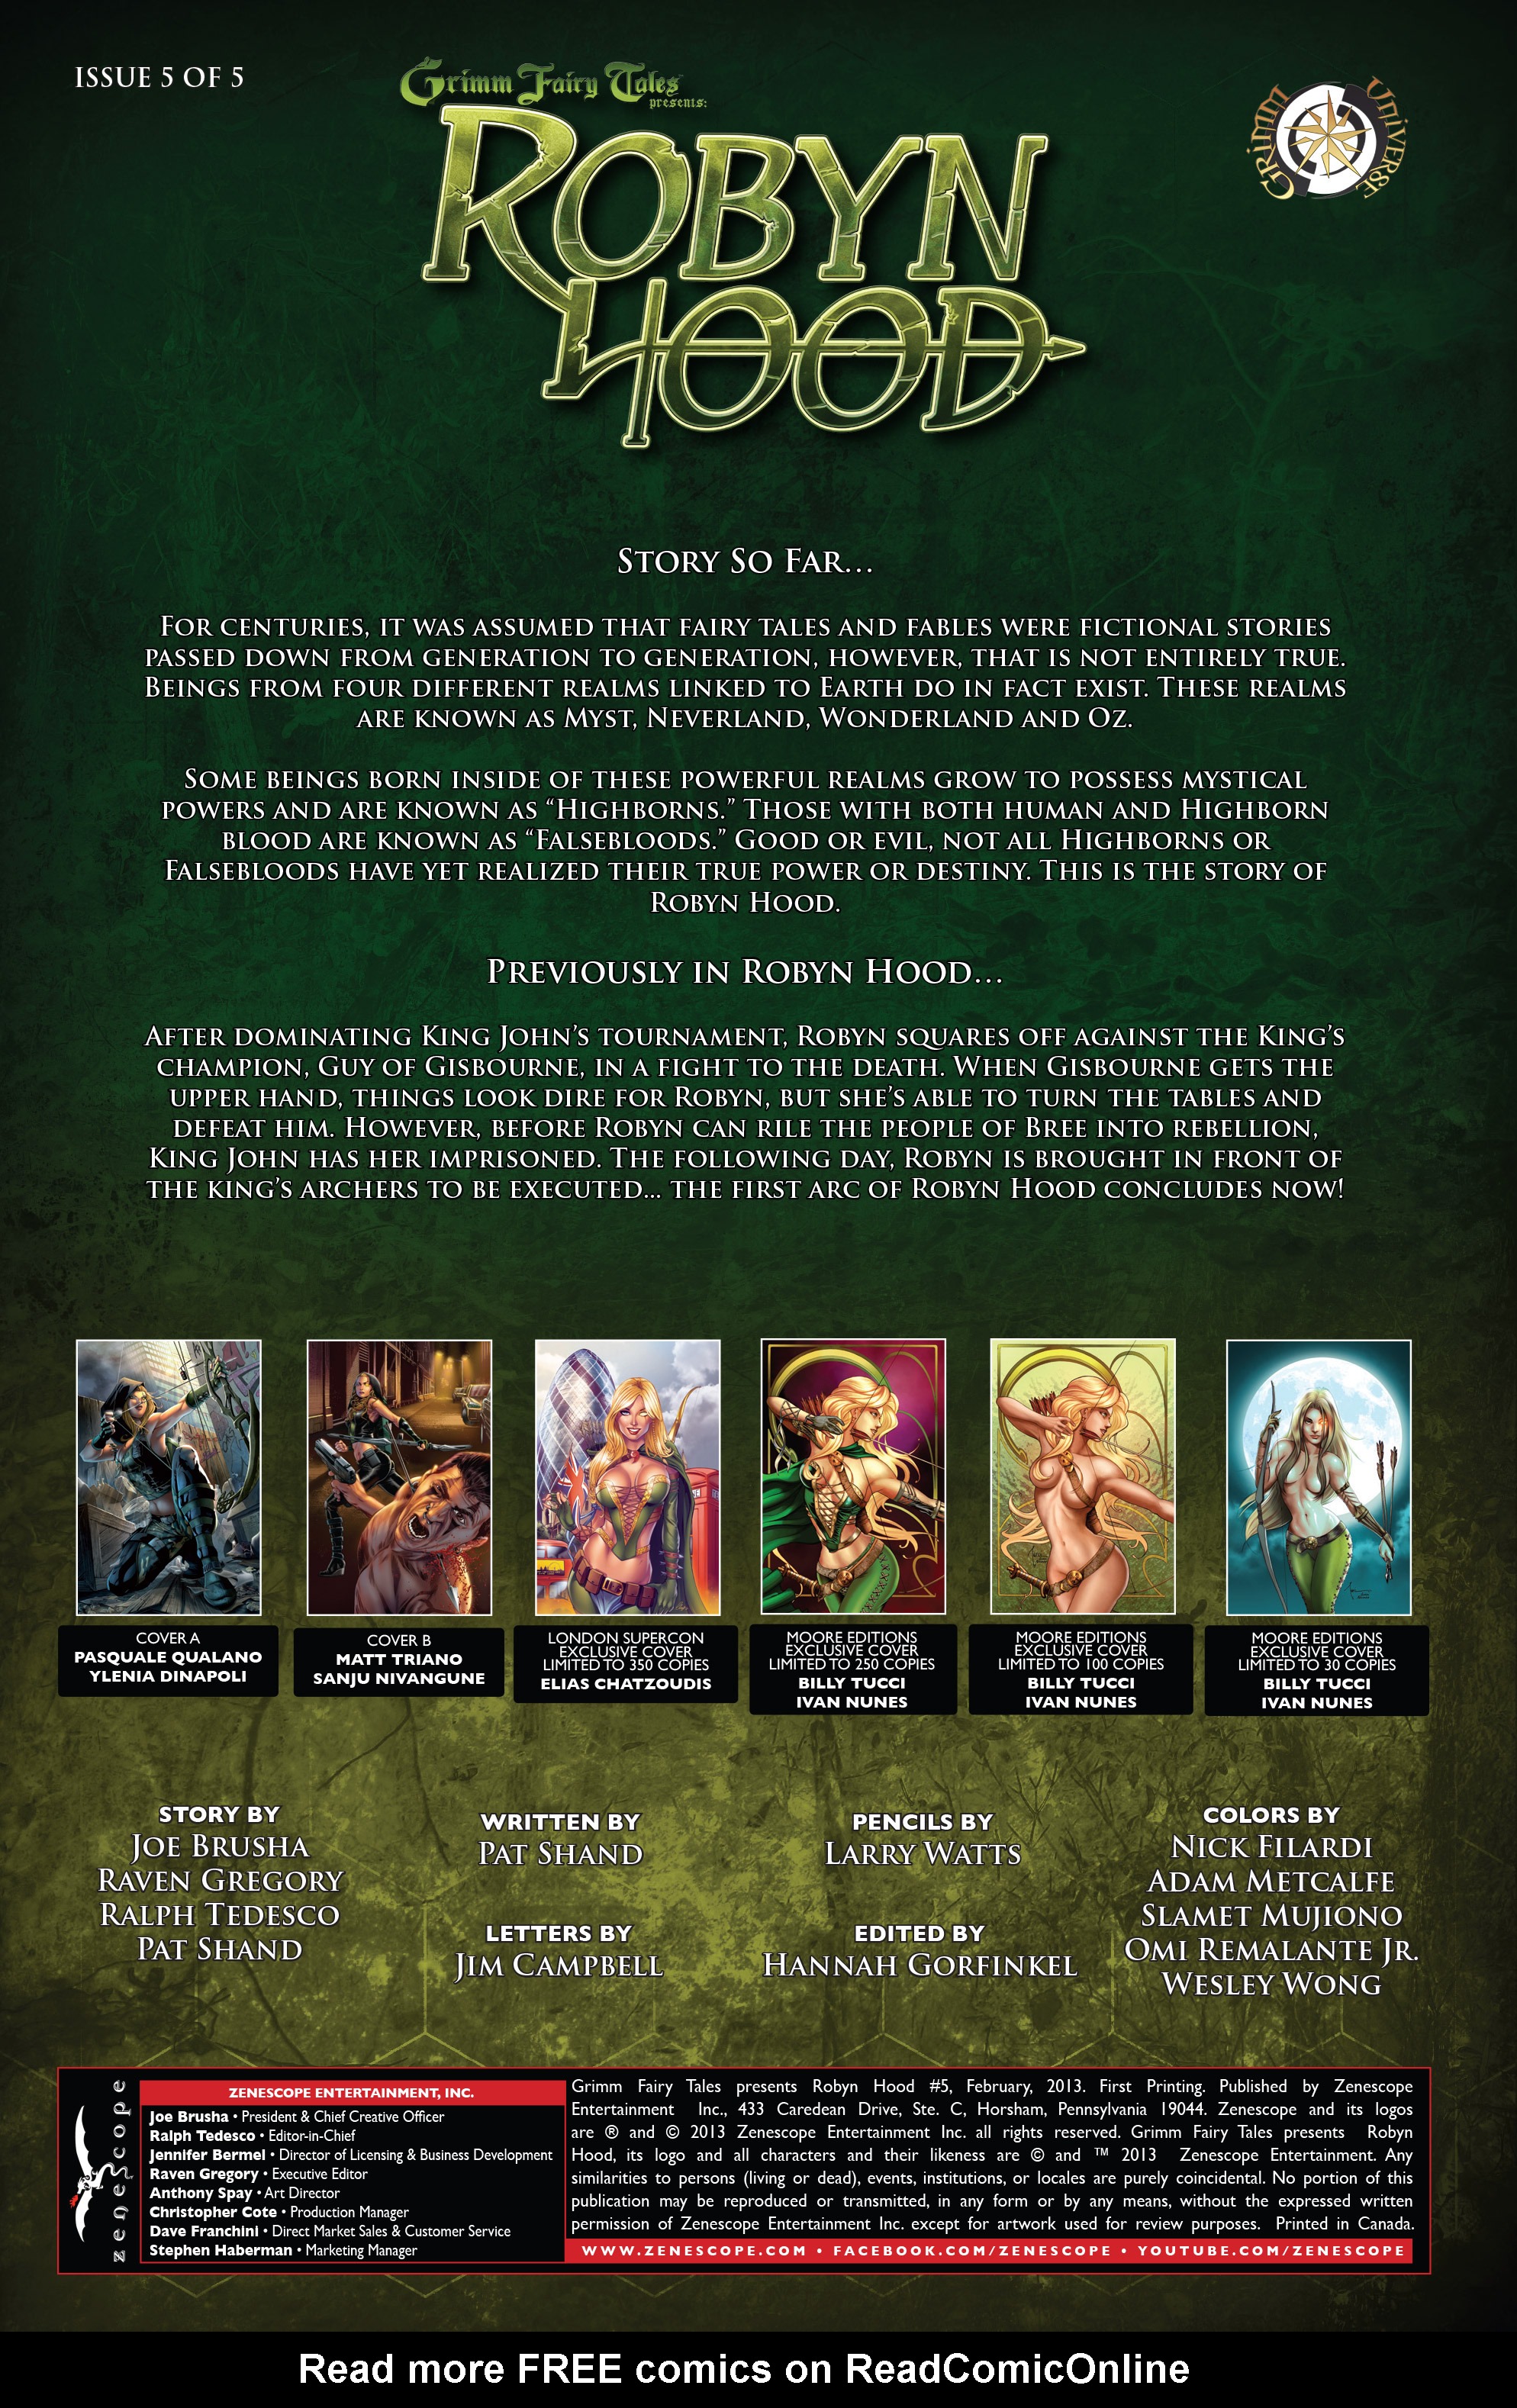 Read online Grimm Fairy Tales presents Robyn Hood (2012) comic -  Issue #5 - 2